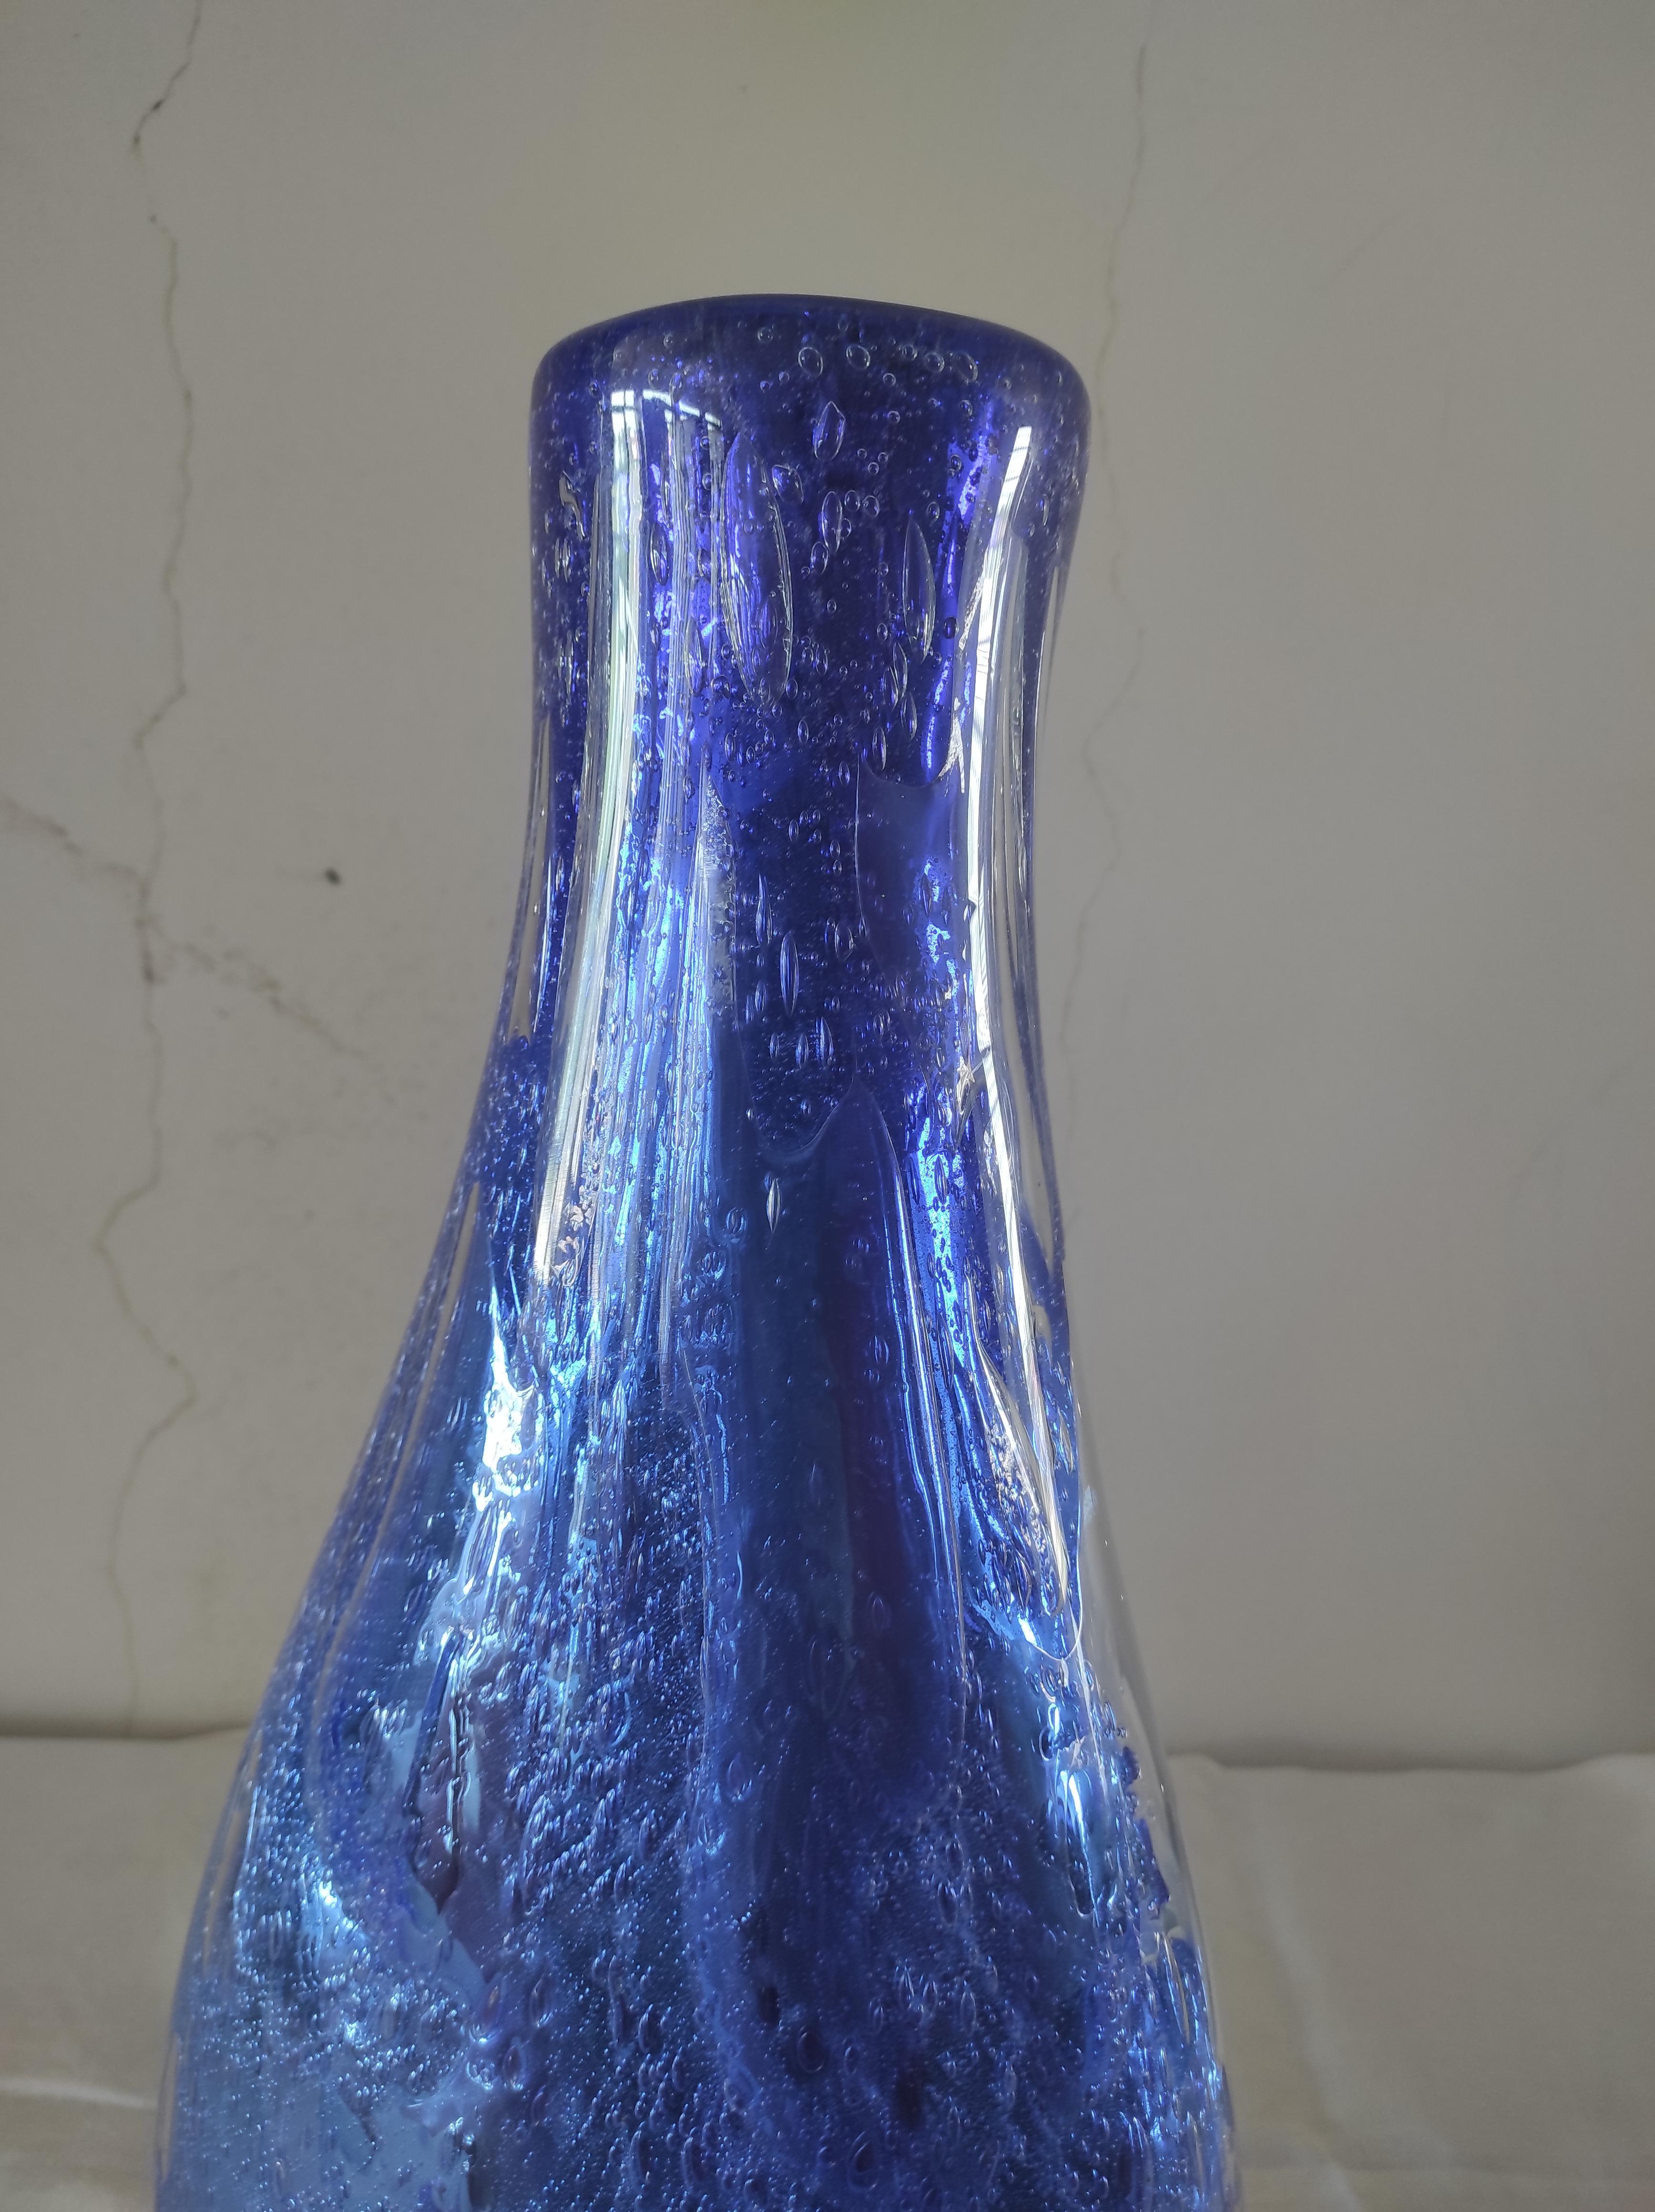 This vase was made by Sergio Costantini a Murano master. It is a blue reminiscent of the ocean the most beautiful depths of an ocean.Two techniques are used.The first of silver leaf on glass, used by artists and craftsmen mainly during the